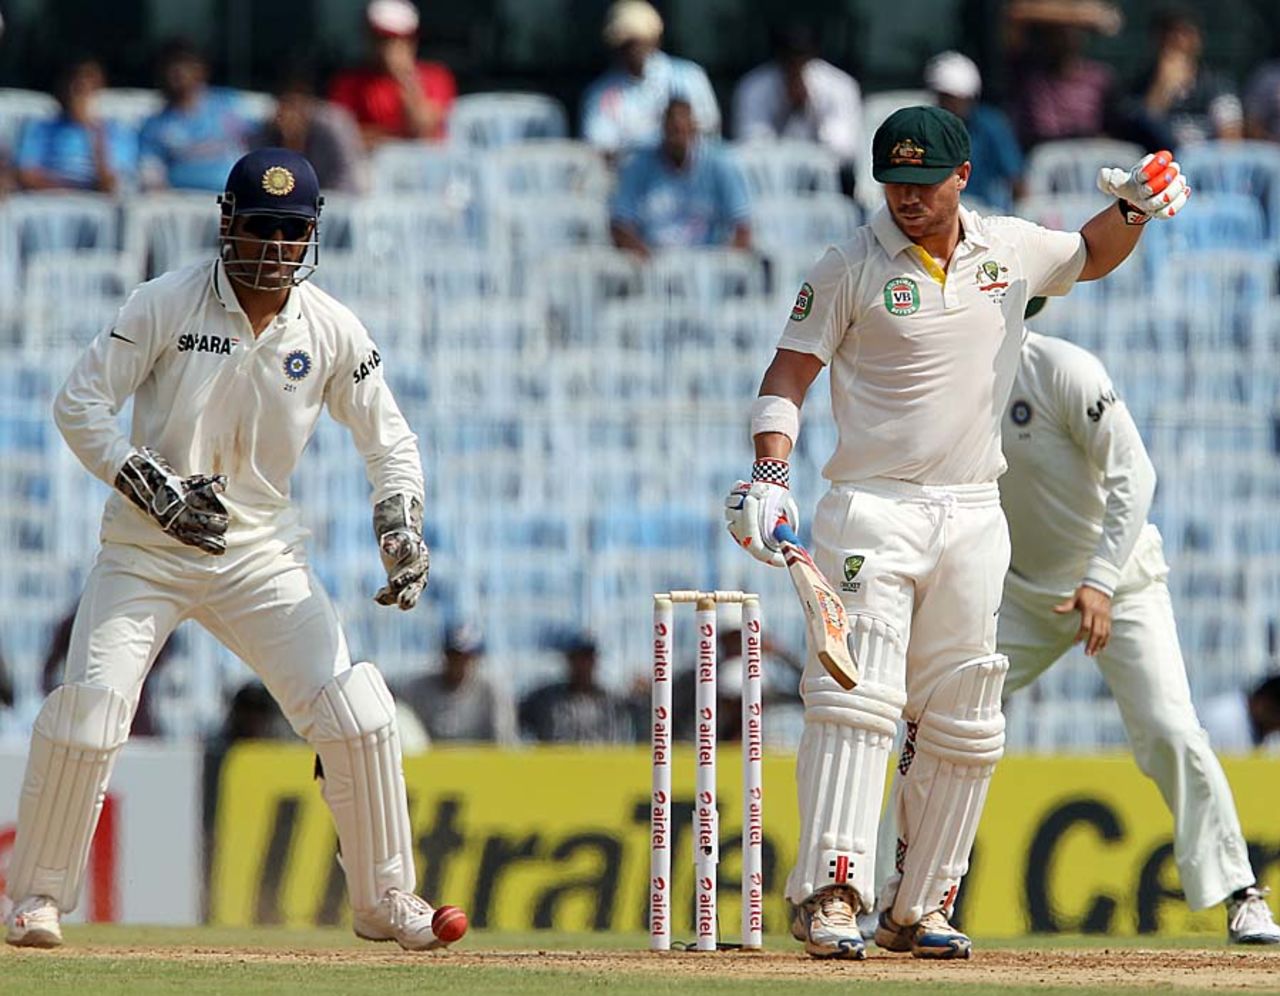 David Warner is hit on the hand by a delivery, India v Australia, 1st Test, Chennai, 1st day, February 22, 2013